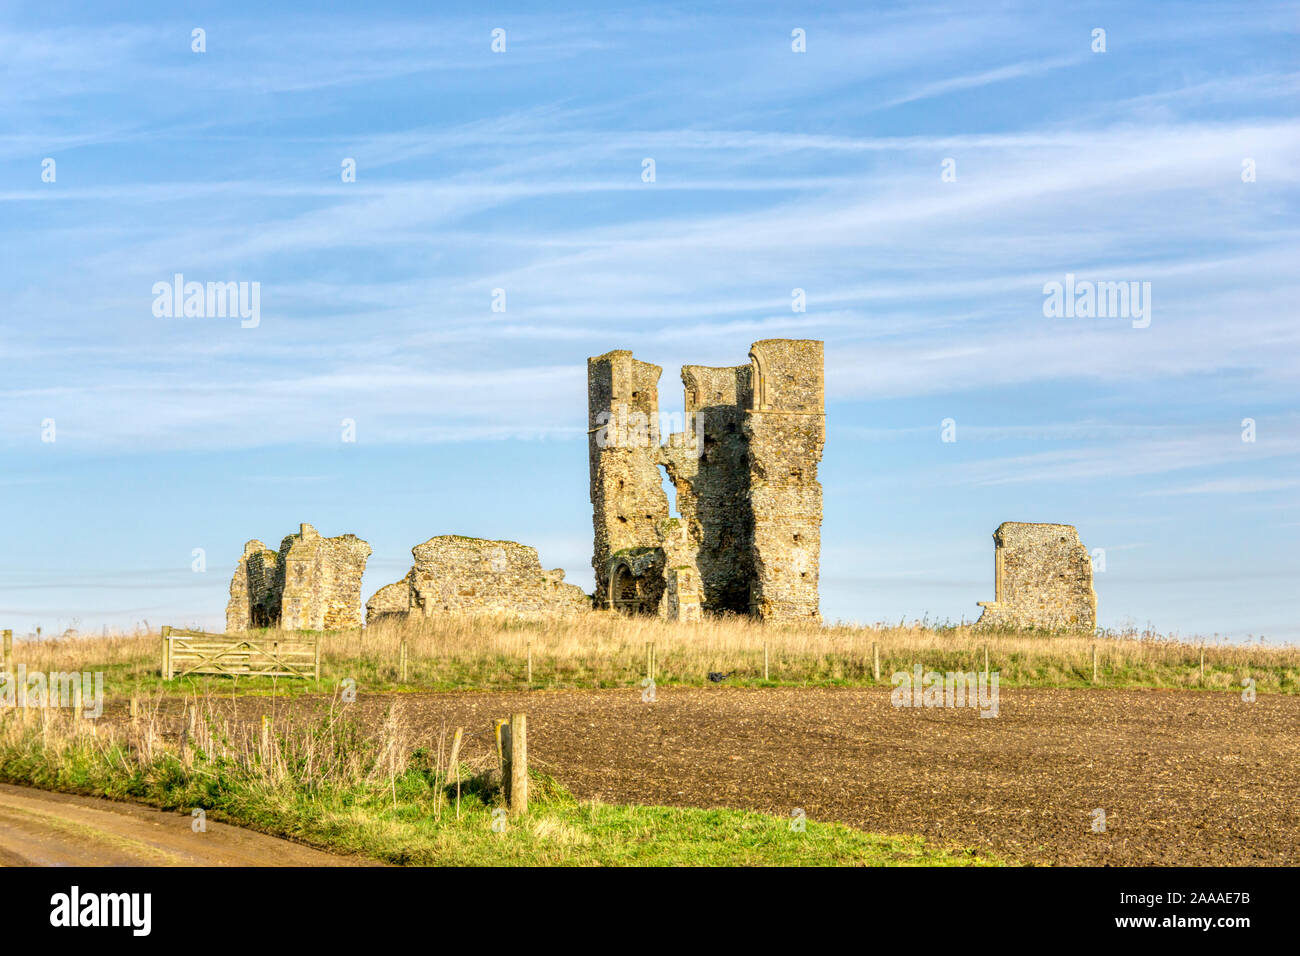 The ruined medieval church of St Mary or St James at Bawsey, near King's Lynn, Norfolk. Known locally as Bawsey Ruins. Stock Photo